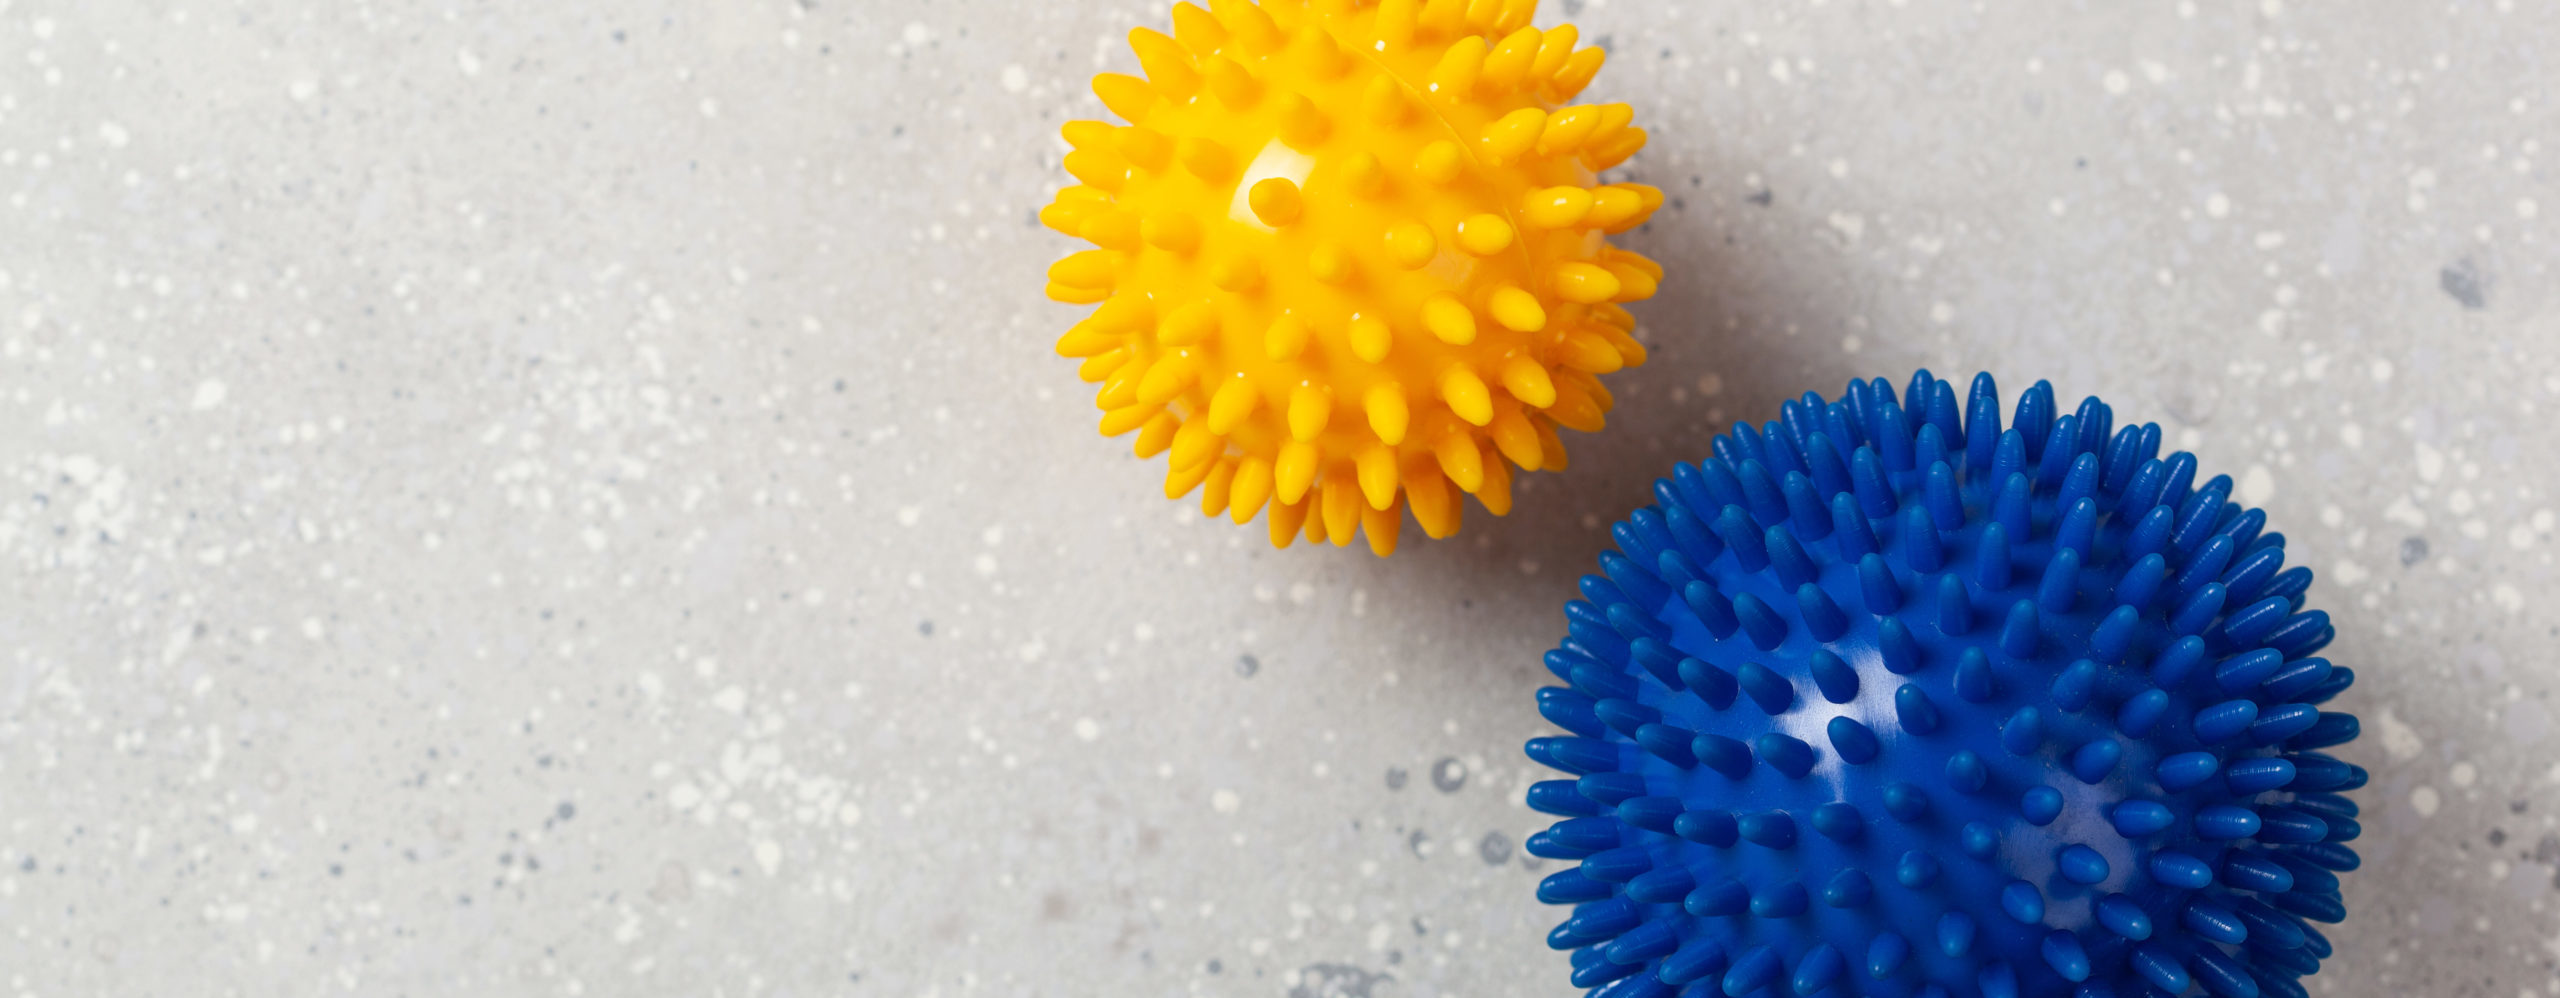 Physiotherapy spikey balls